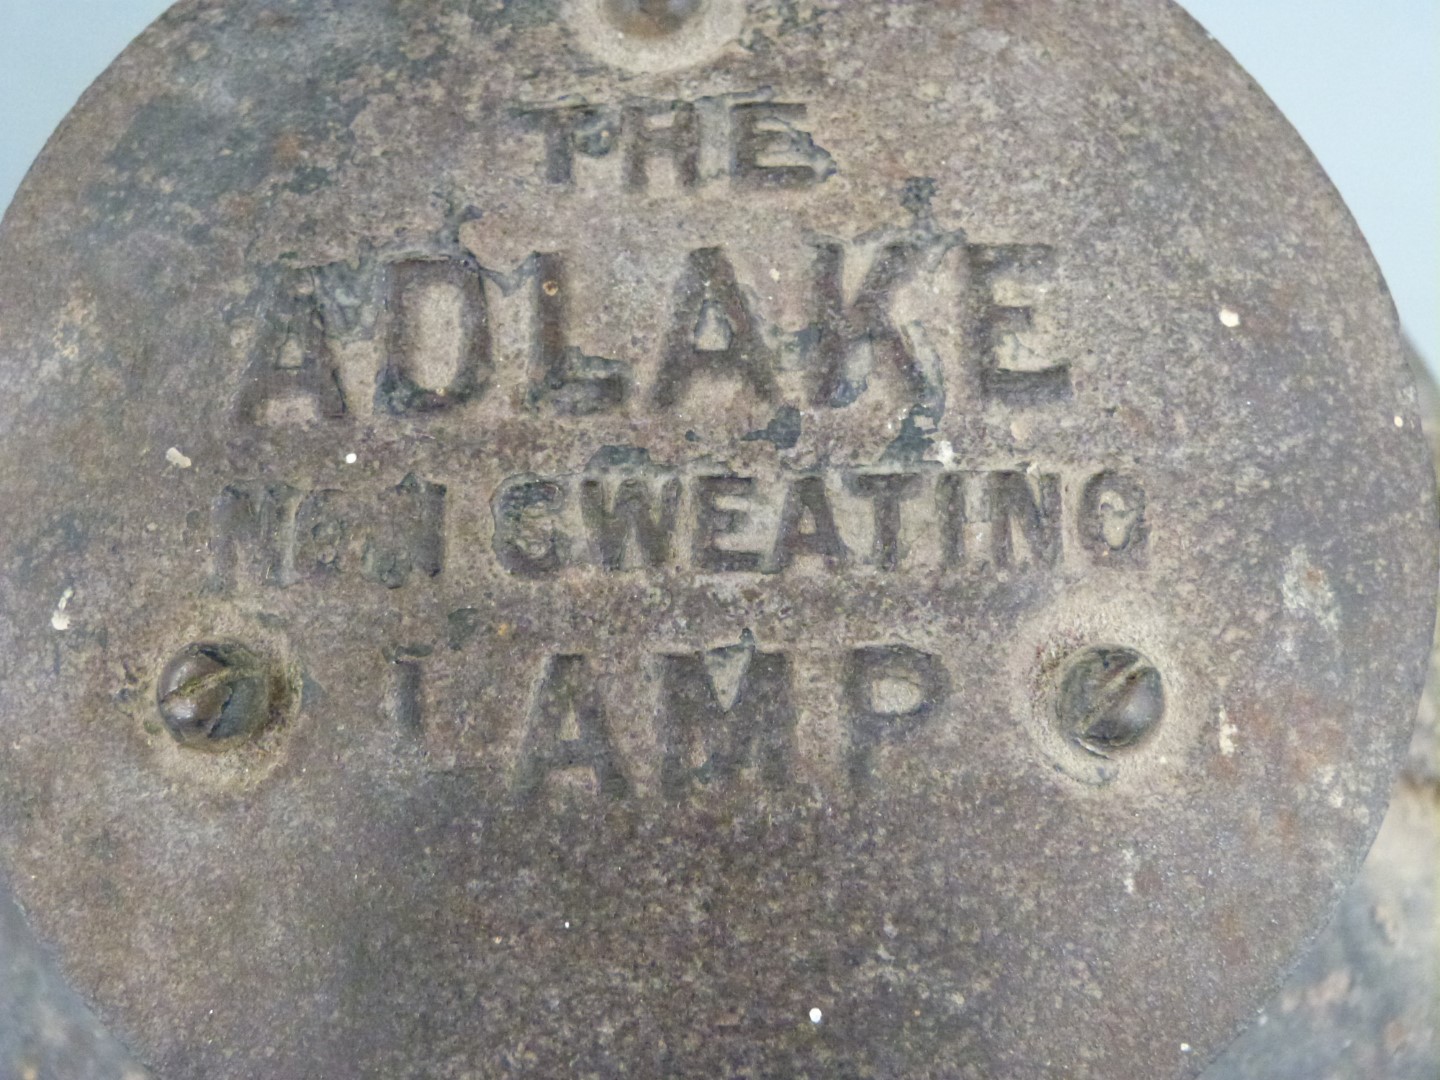 Adlake LMS railway lamp, height 48cm, the vendor restored and lived in Nailsworth railway station - Image 5 of 6